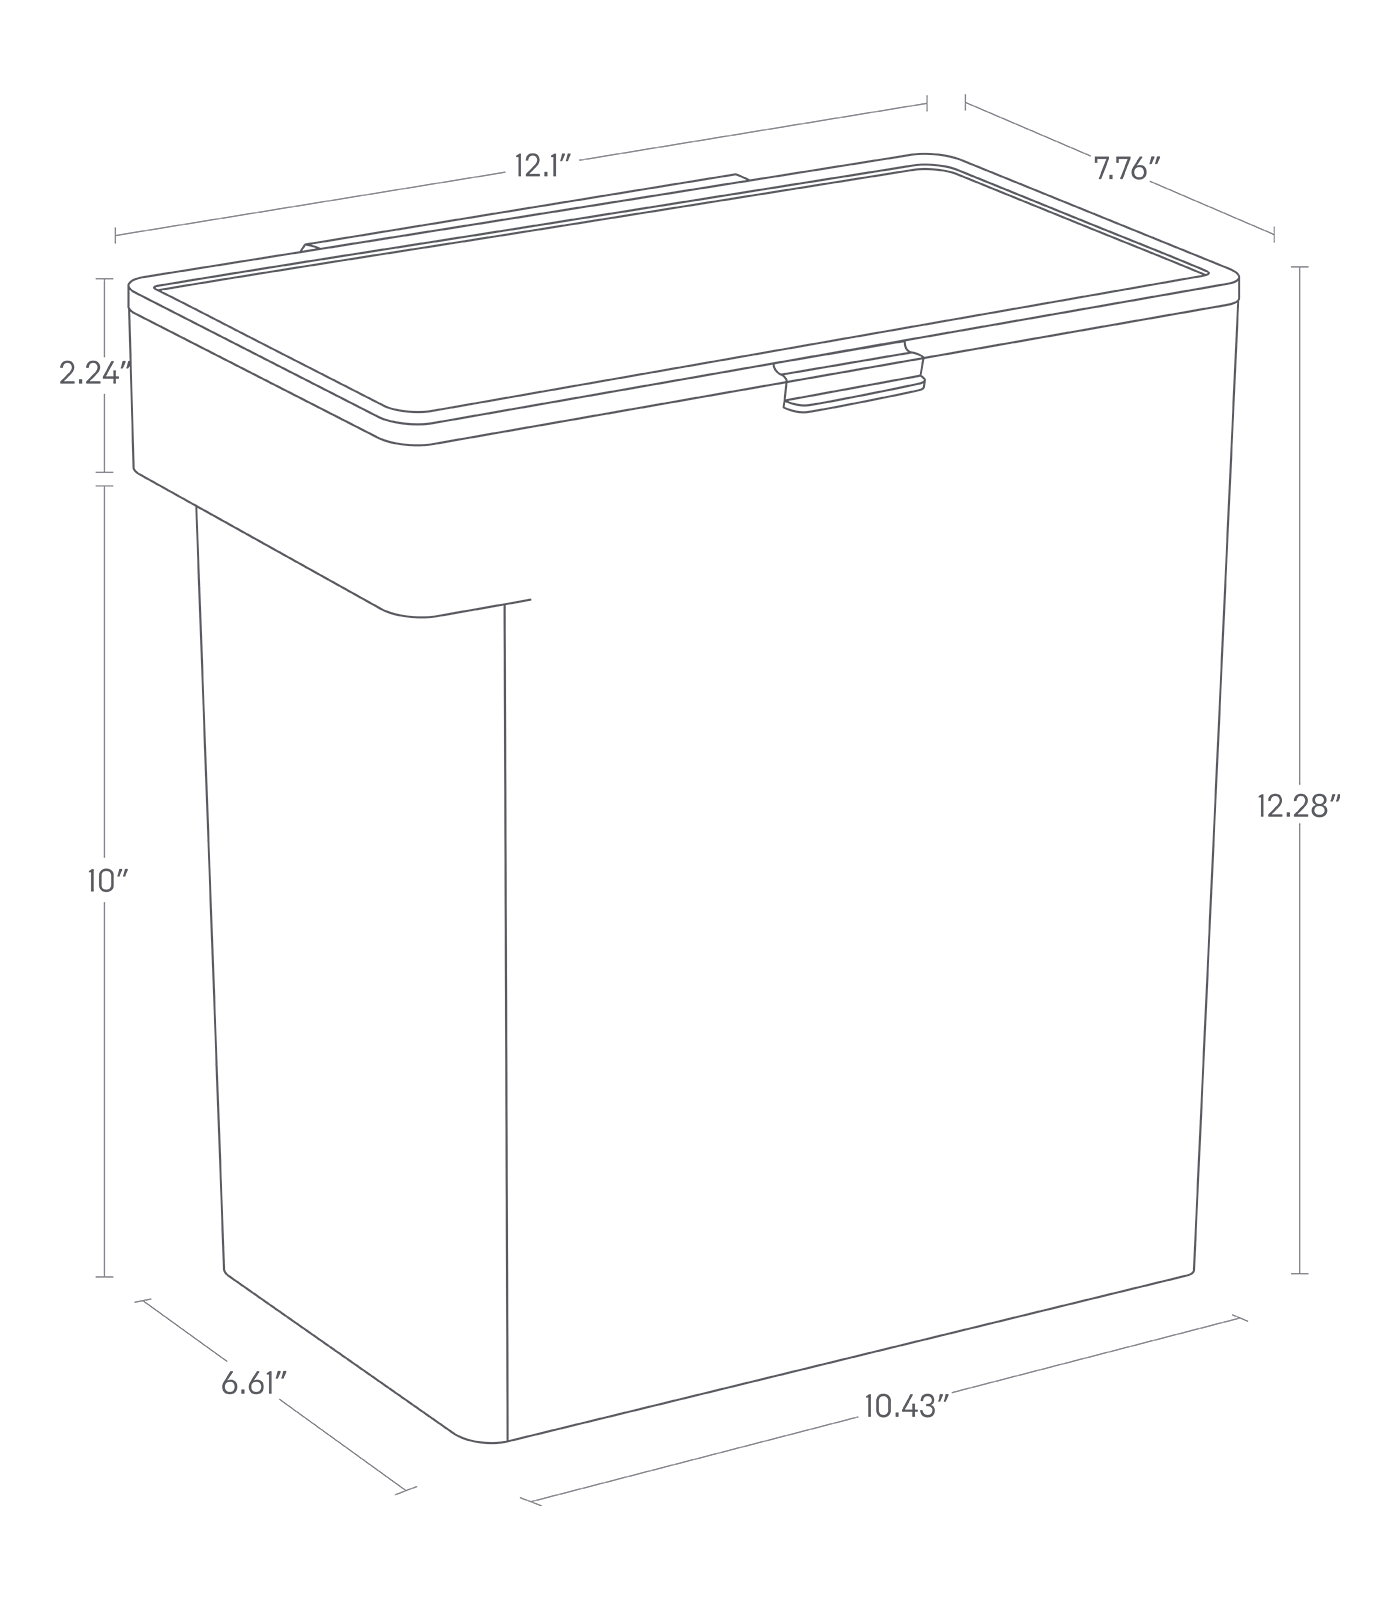 Dimension image for Airtight Pet Food Container - Three Sizes on a white background including dimensions  L 7.76 x W 12.09 x H 12.28 inches